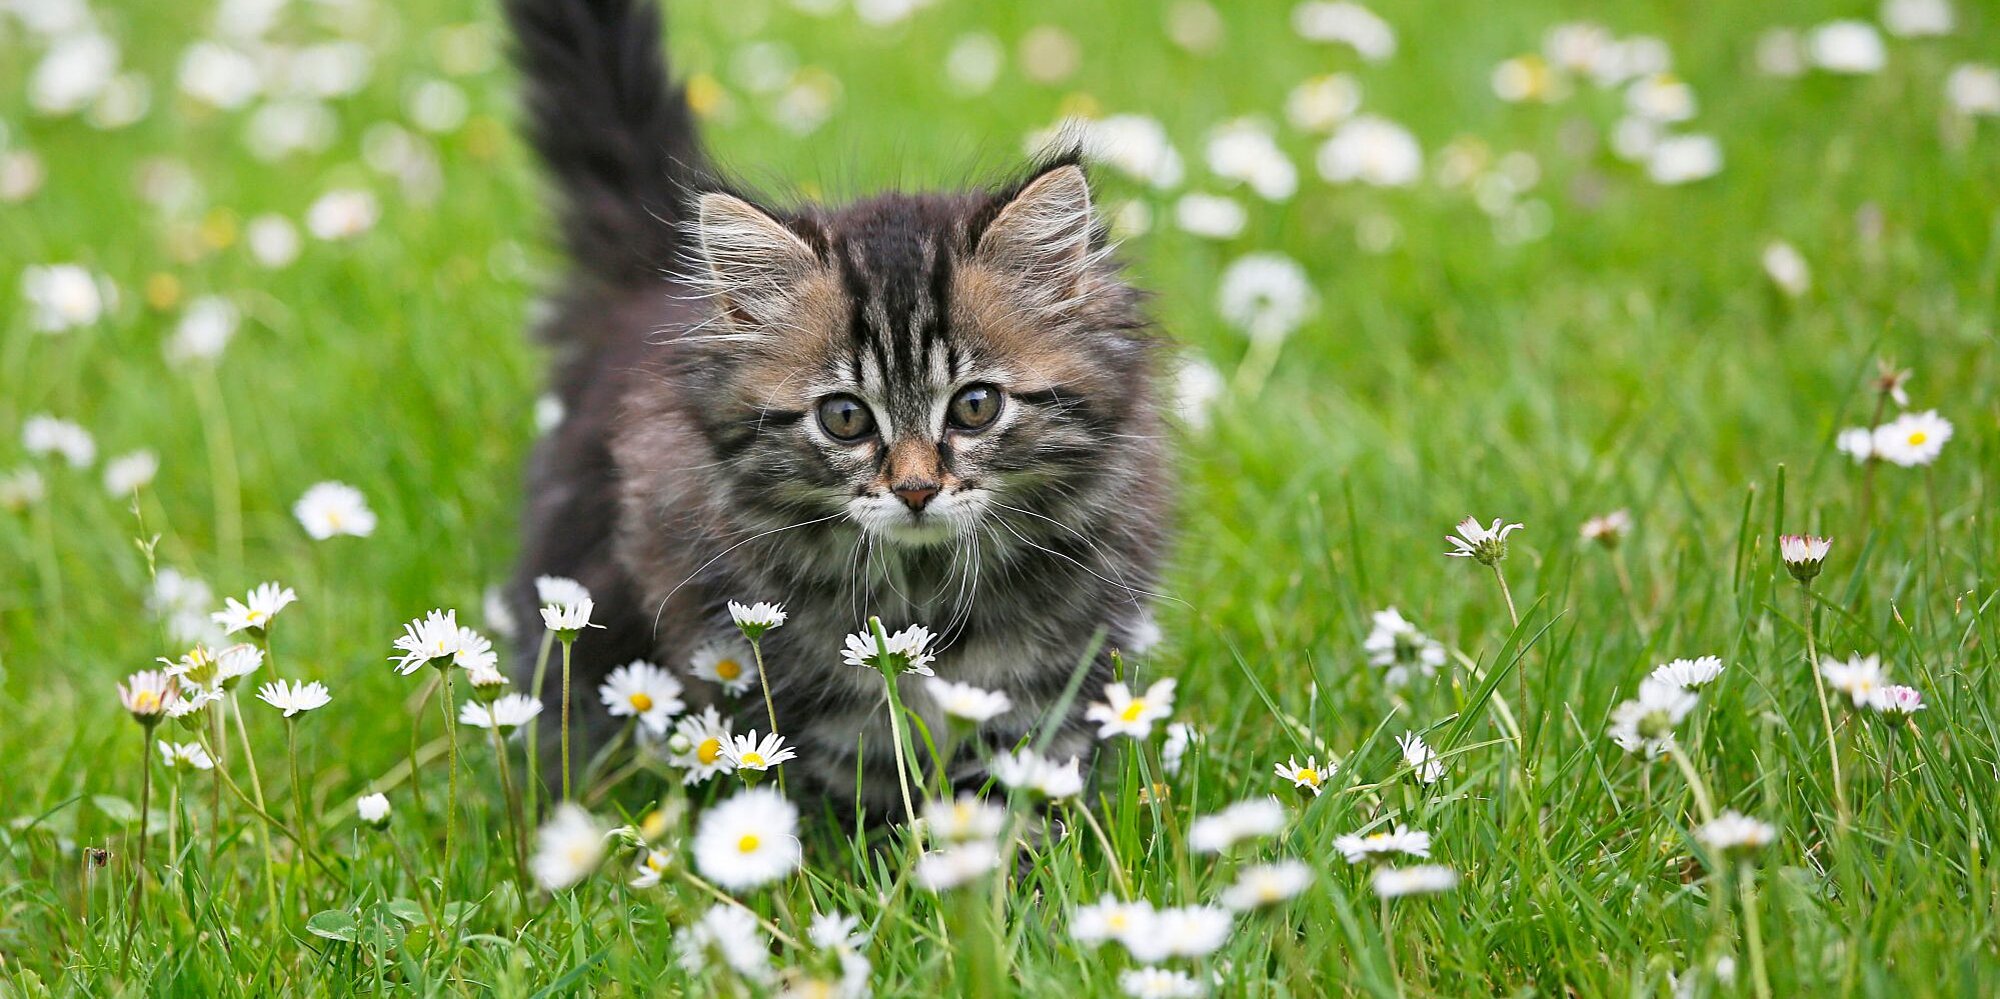 Can Cats Eat Daisies